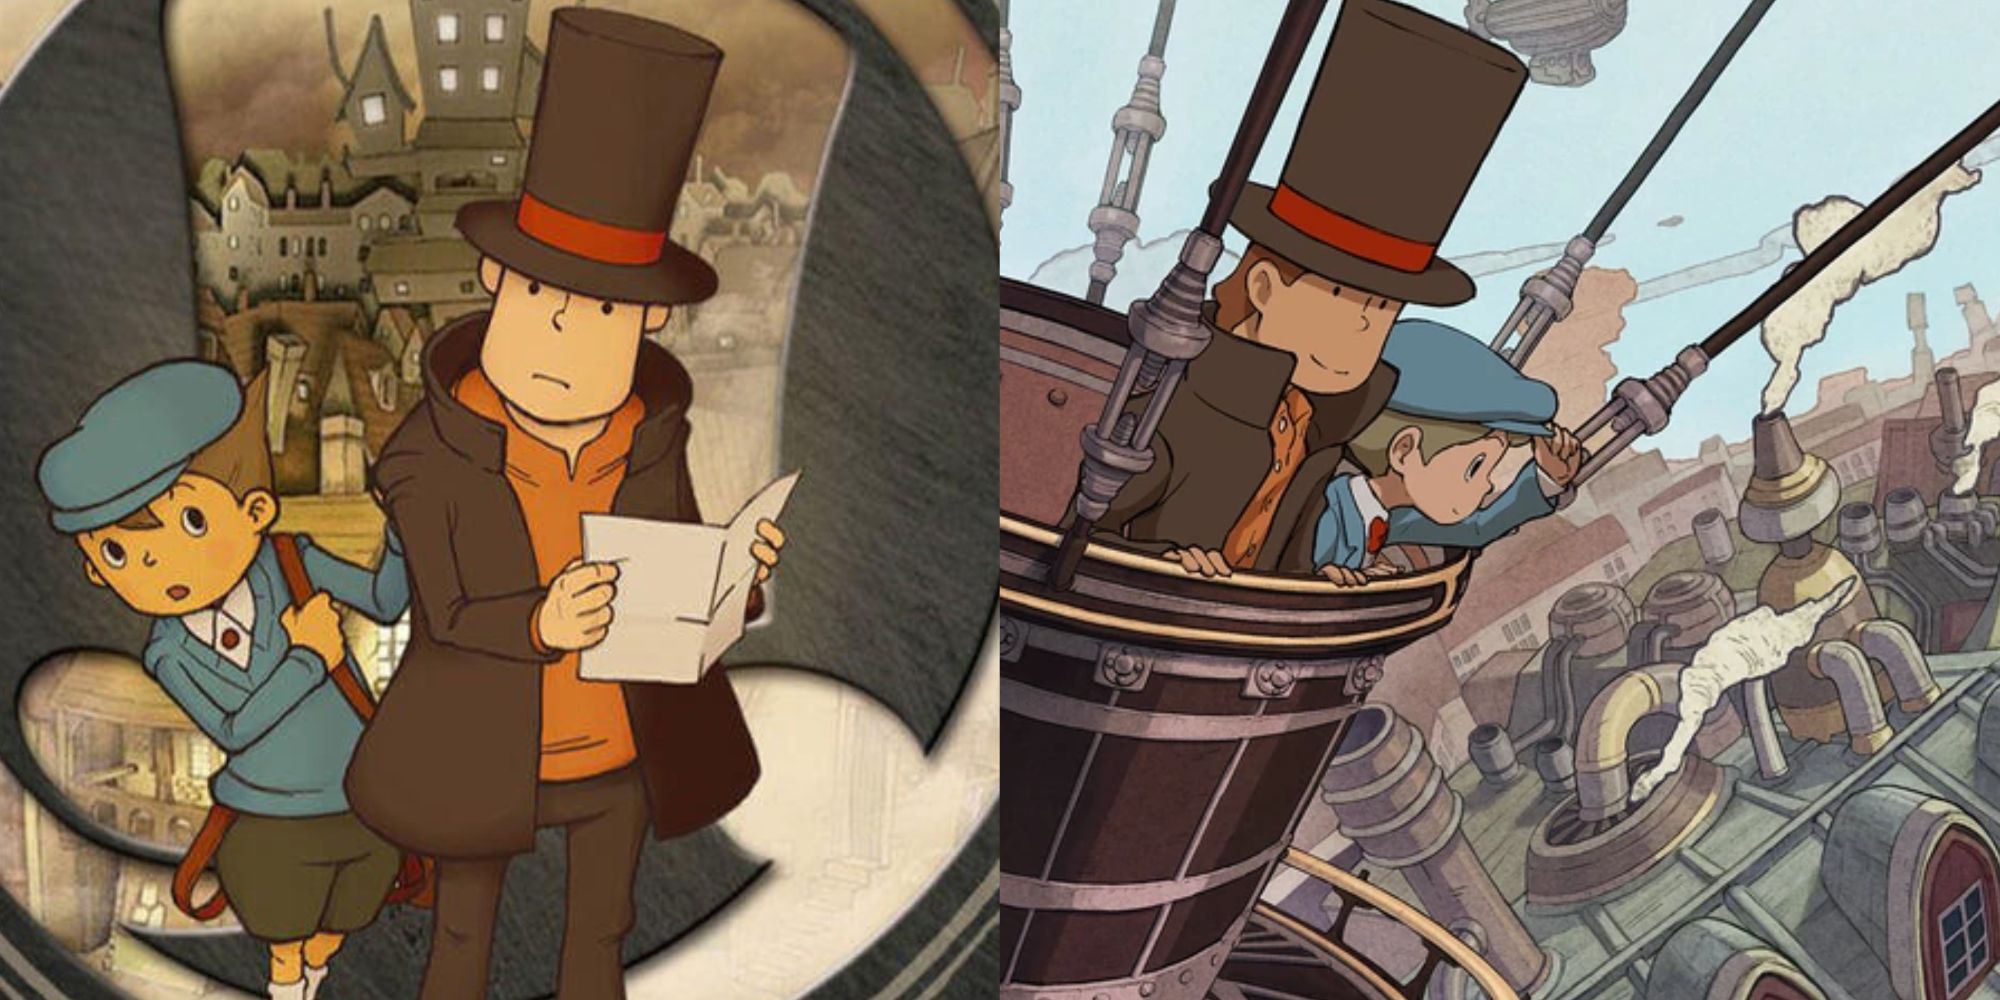 https://static1.thegamerimages.com/wordpress/wp-content/uploads/2023/02/things-you-didn-t-know-about-professor-layton-featured-image.jpg